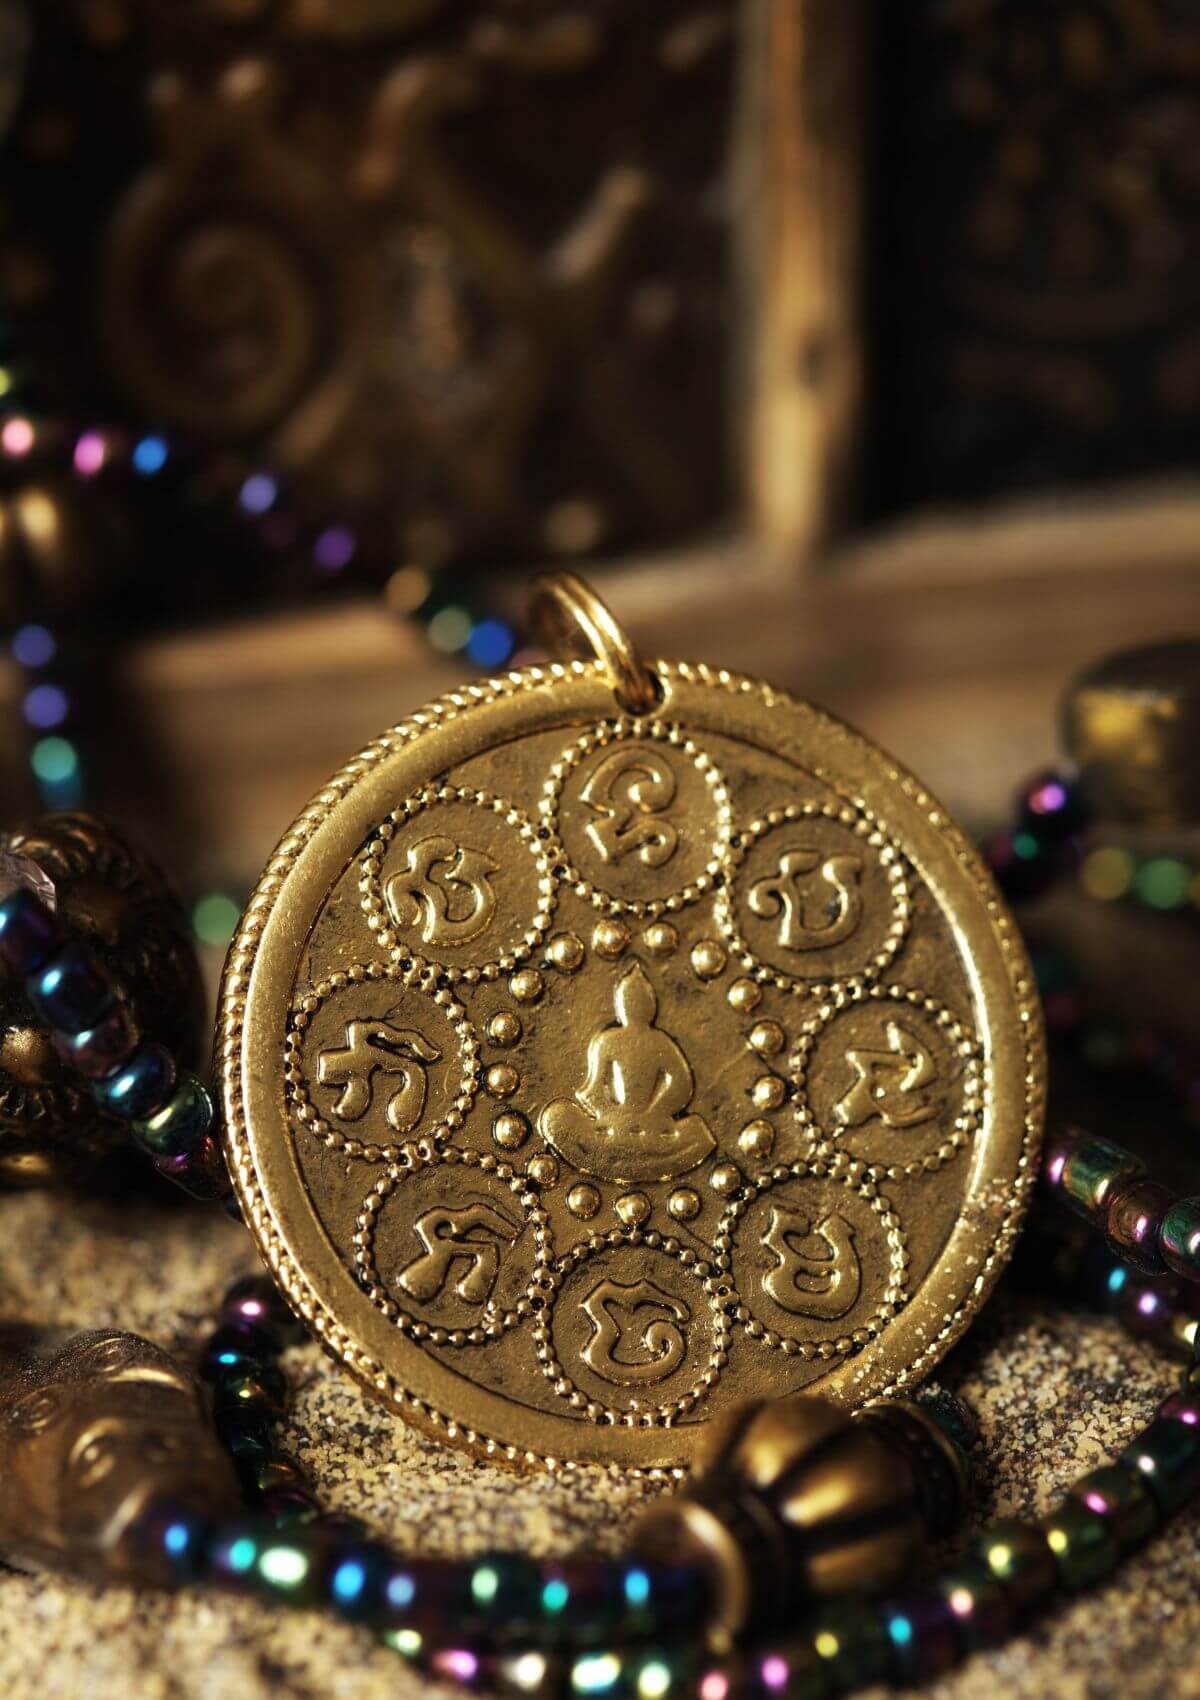 Search for Buddhist amulets if you want spiritual souvenirs from Thailand